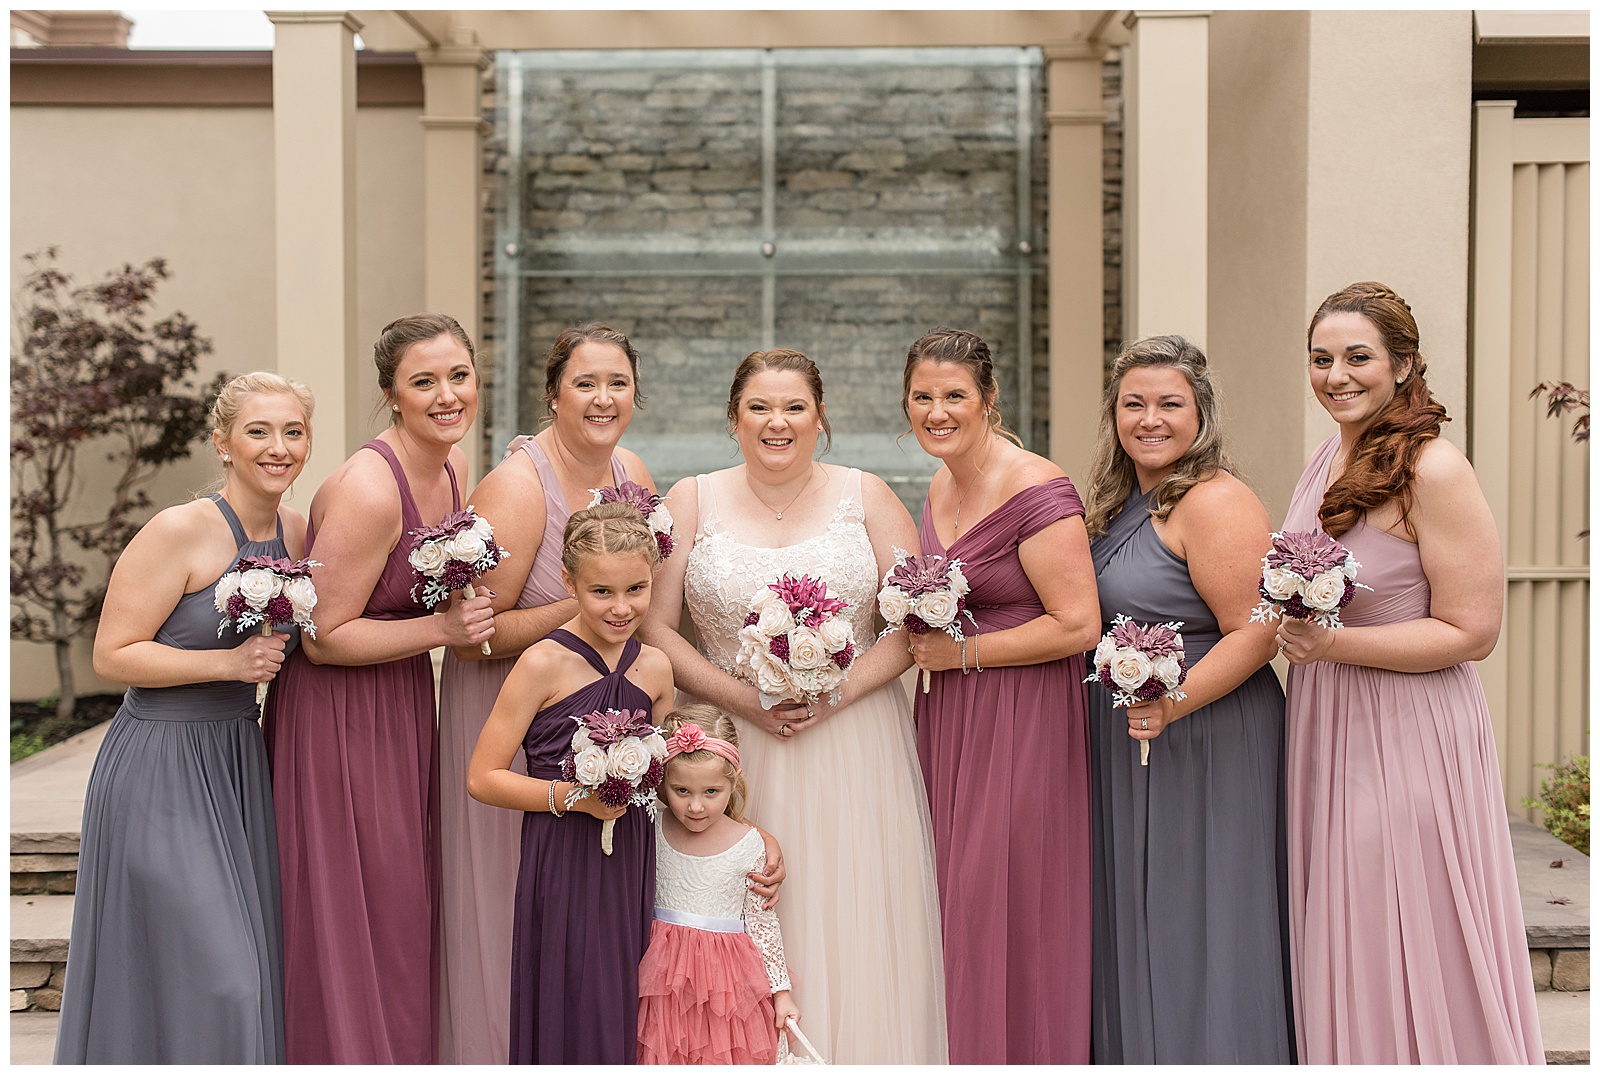 bride with her bridal party in shades of pink and purple dresses holding bouquets